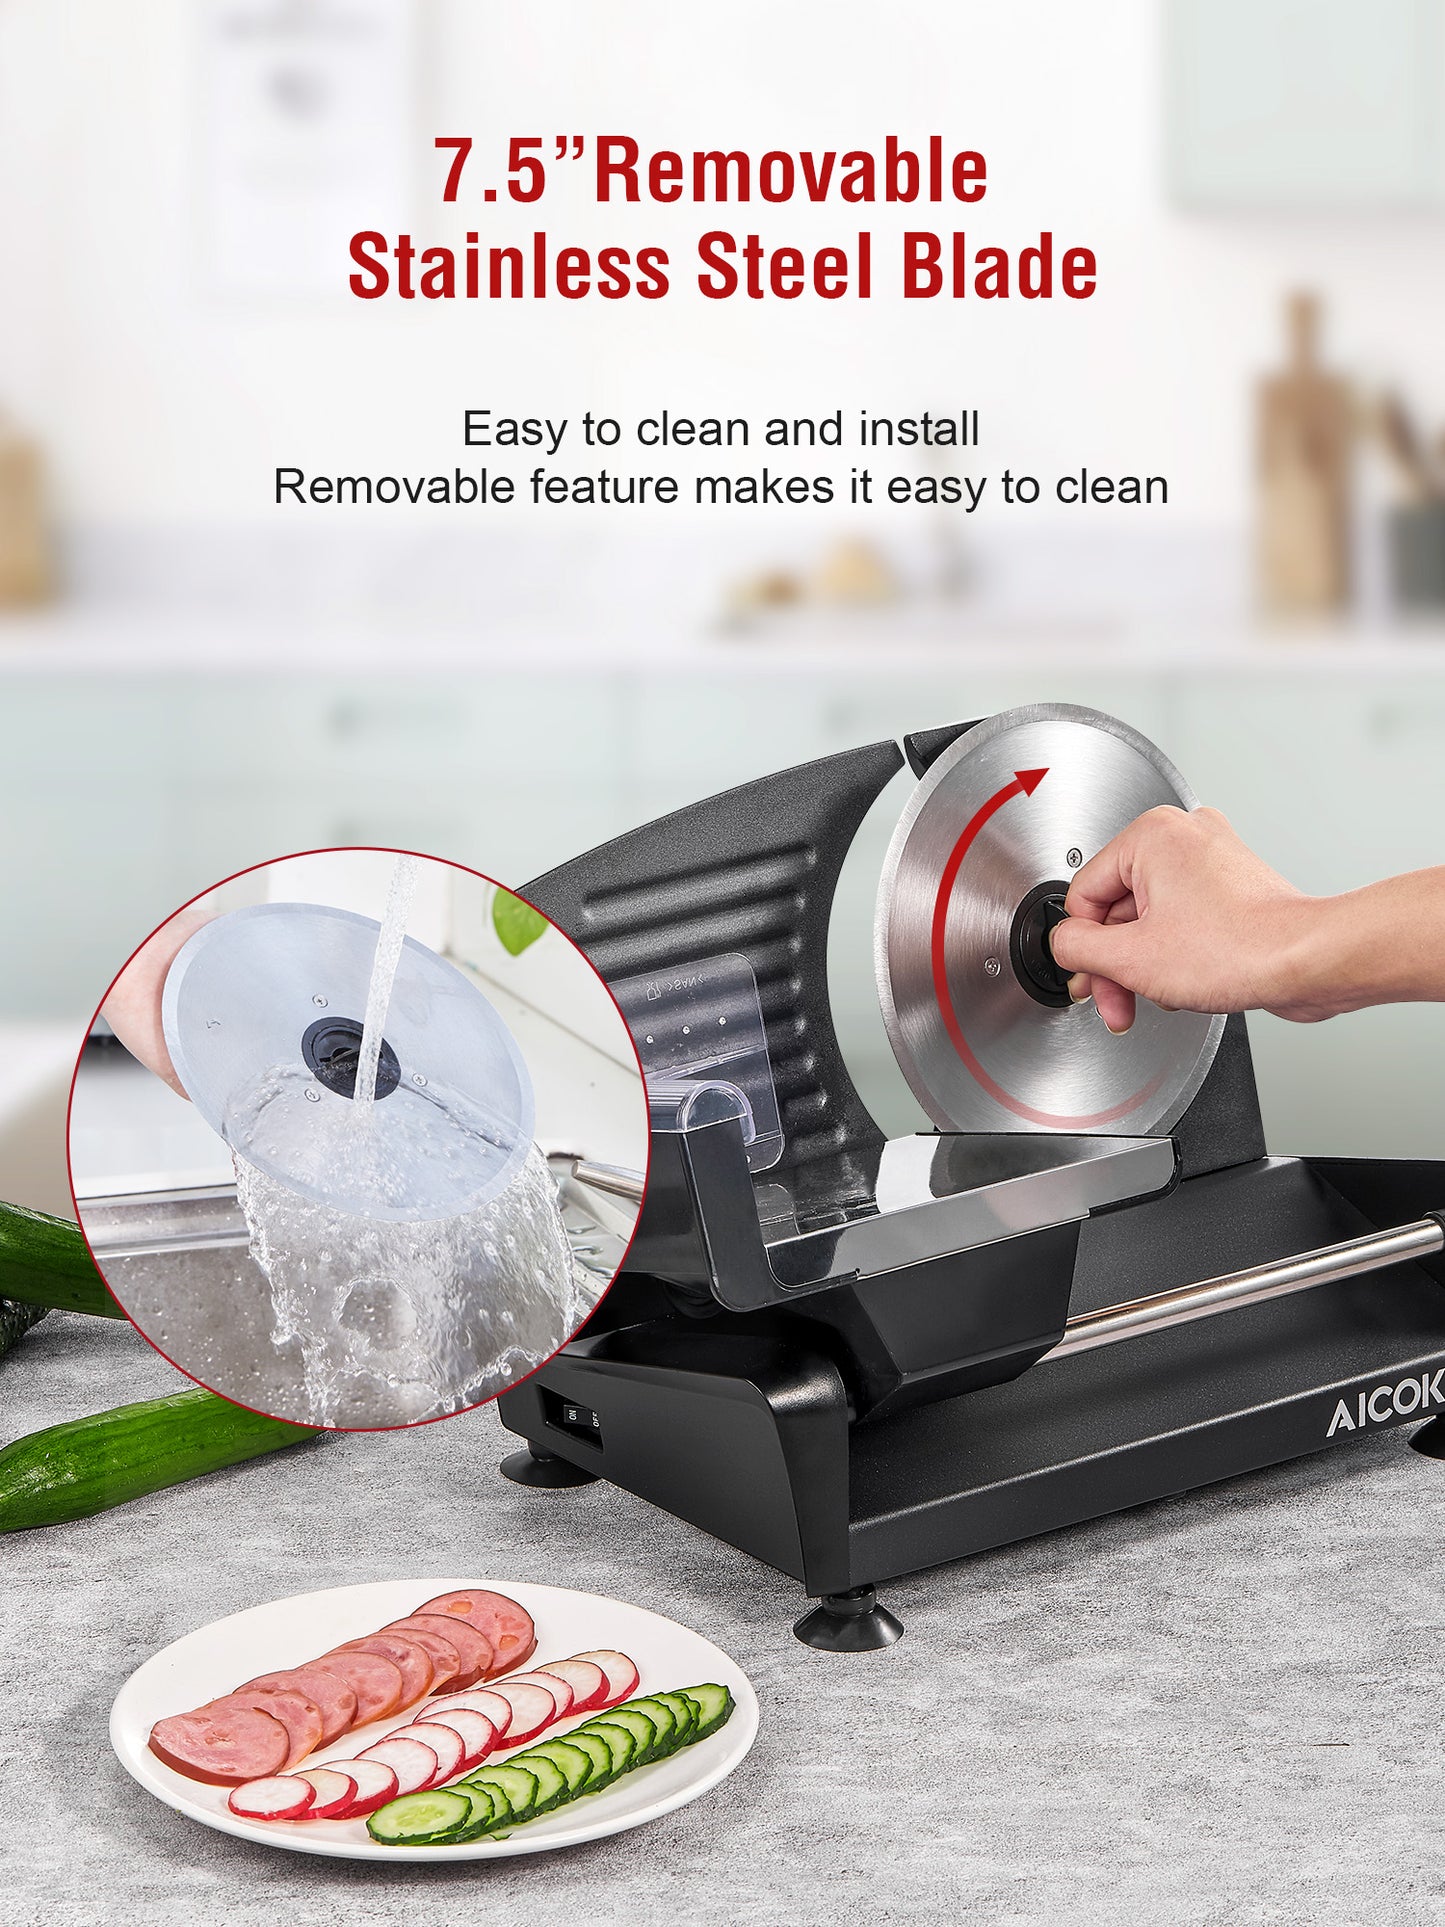 Aicok Home Use Meat Slicer, 200W Electric Deli & Food Slicer Home Use, 0-15mm Adjustable Thickness Food Slicer Machine Cut Meat, Cheese, Bread, removable stainless steel blade, SL-519N